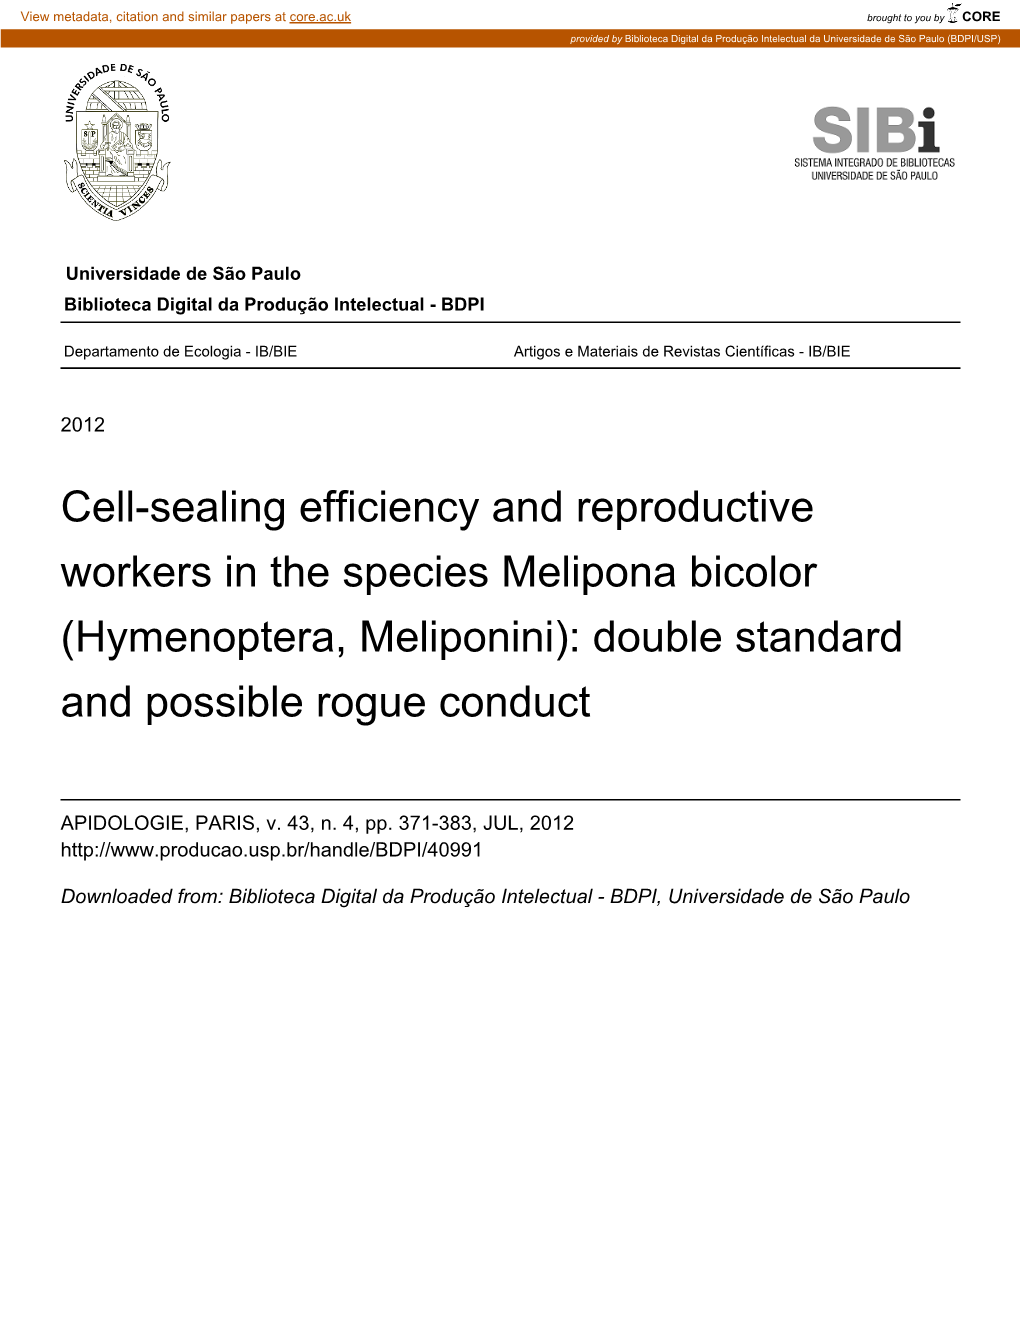 Cell-Sealing Efficiency and Reproductive Workers in the Species Melipona Bicolor (Hymenoptera, Meliponini): Double Standard and Possible Rogue Conduct